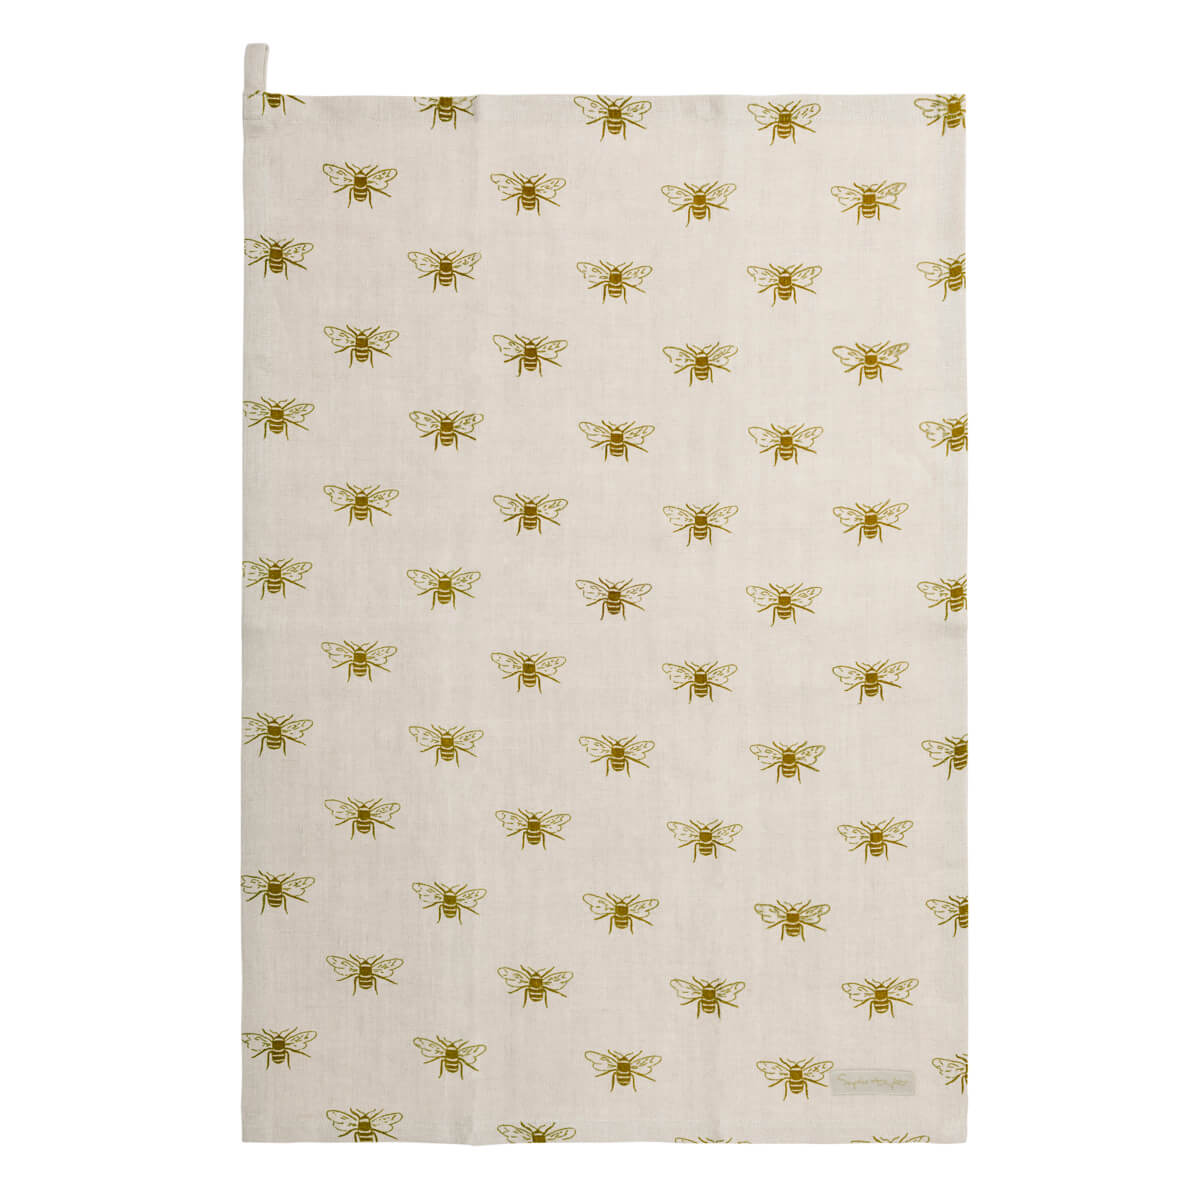 Tea towel made from 100% linen covered in Sophie Allport mustard gold bees on a neutral background. 